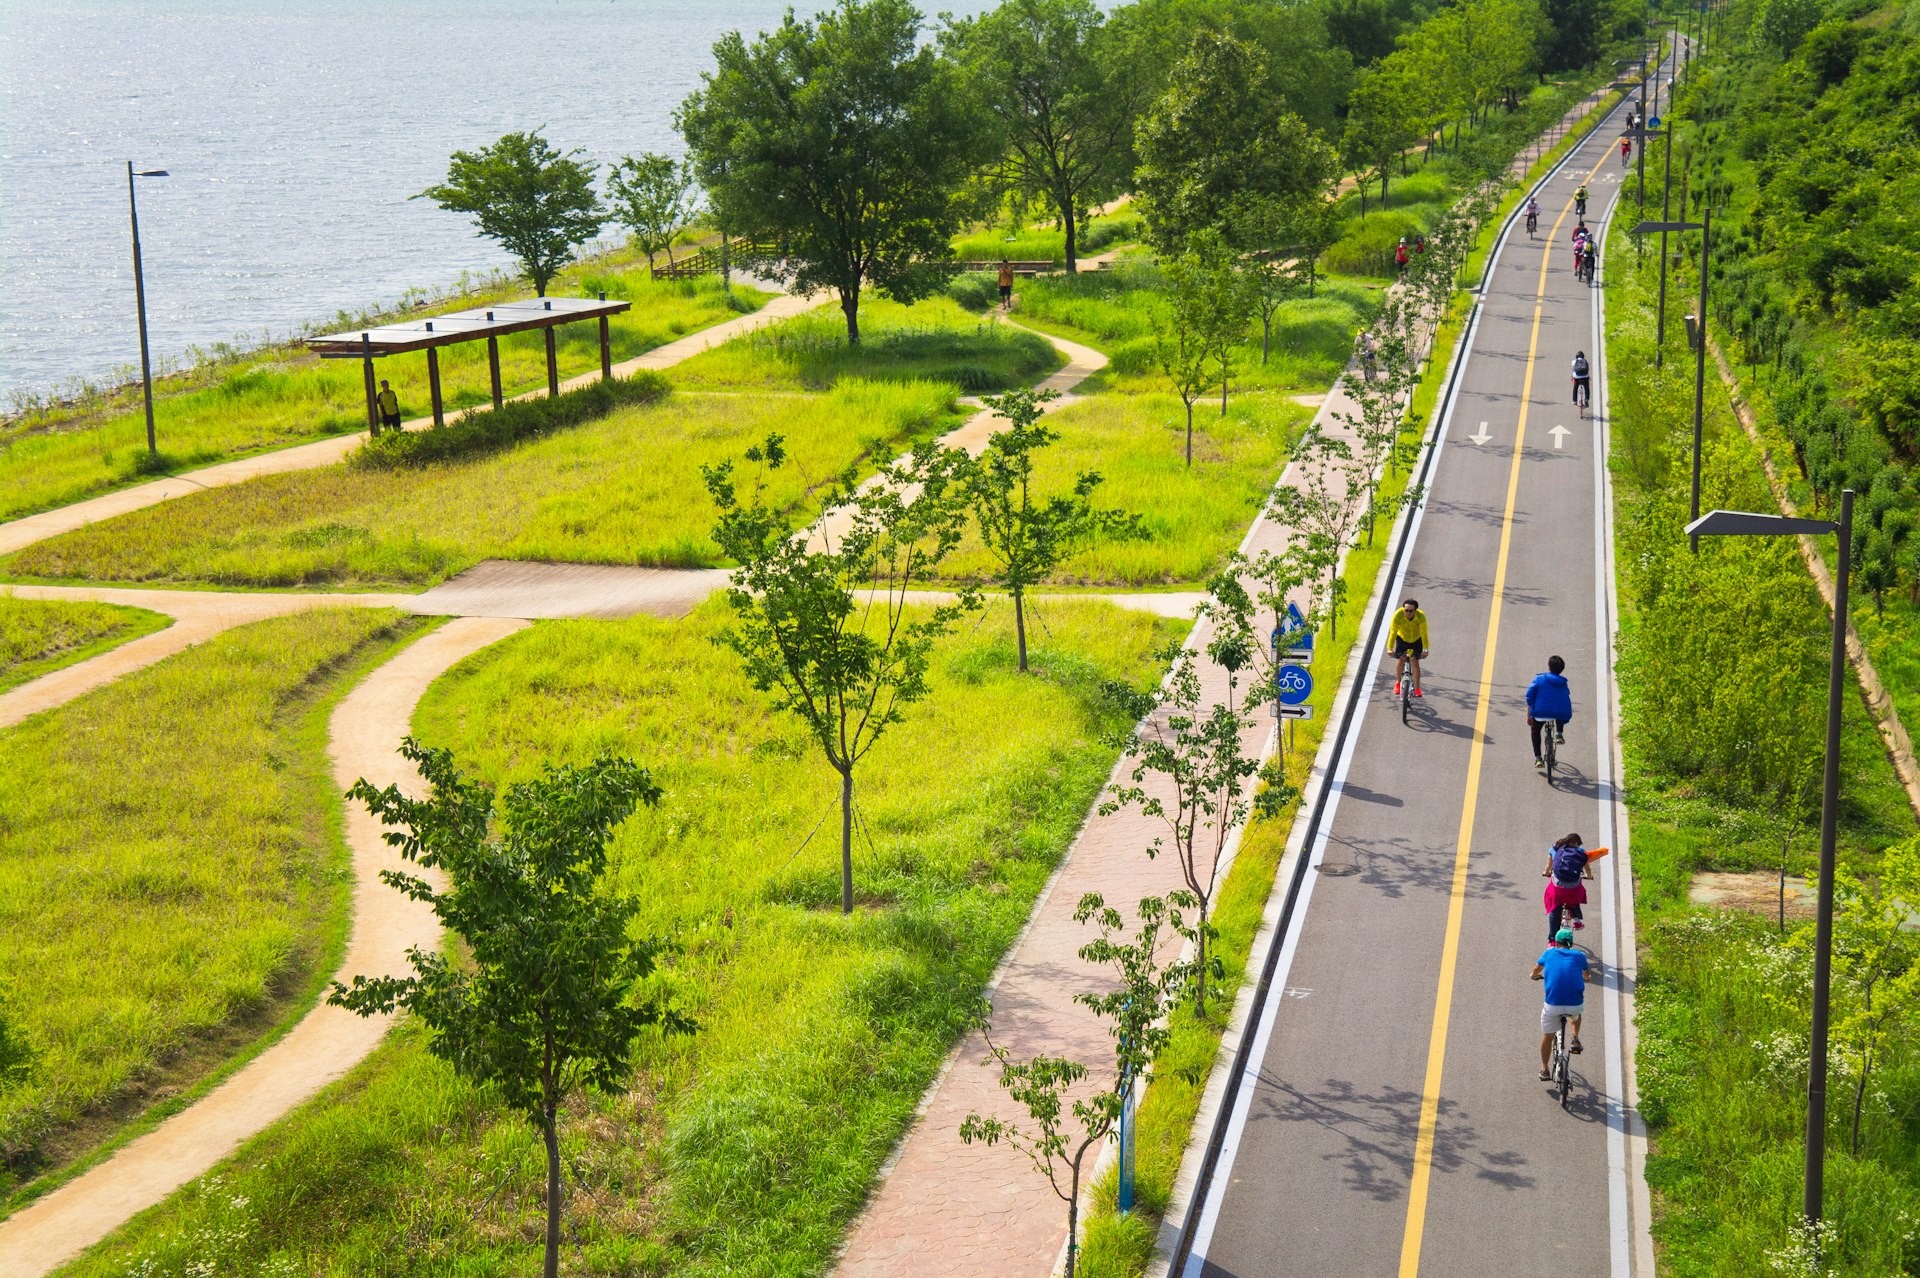 Cyclists ride along a paved path beside a river